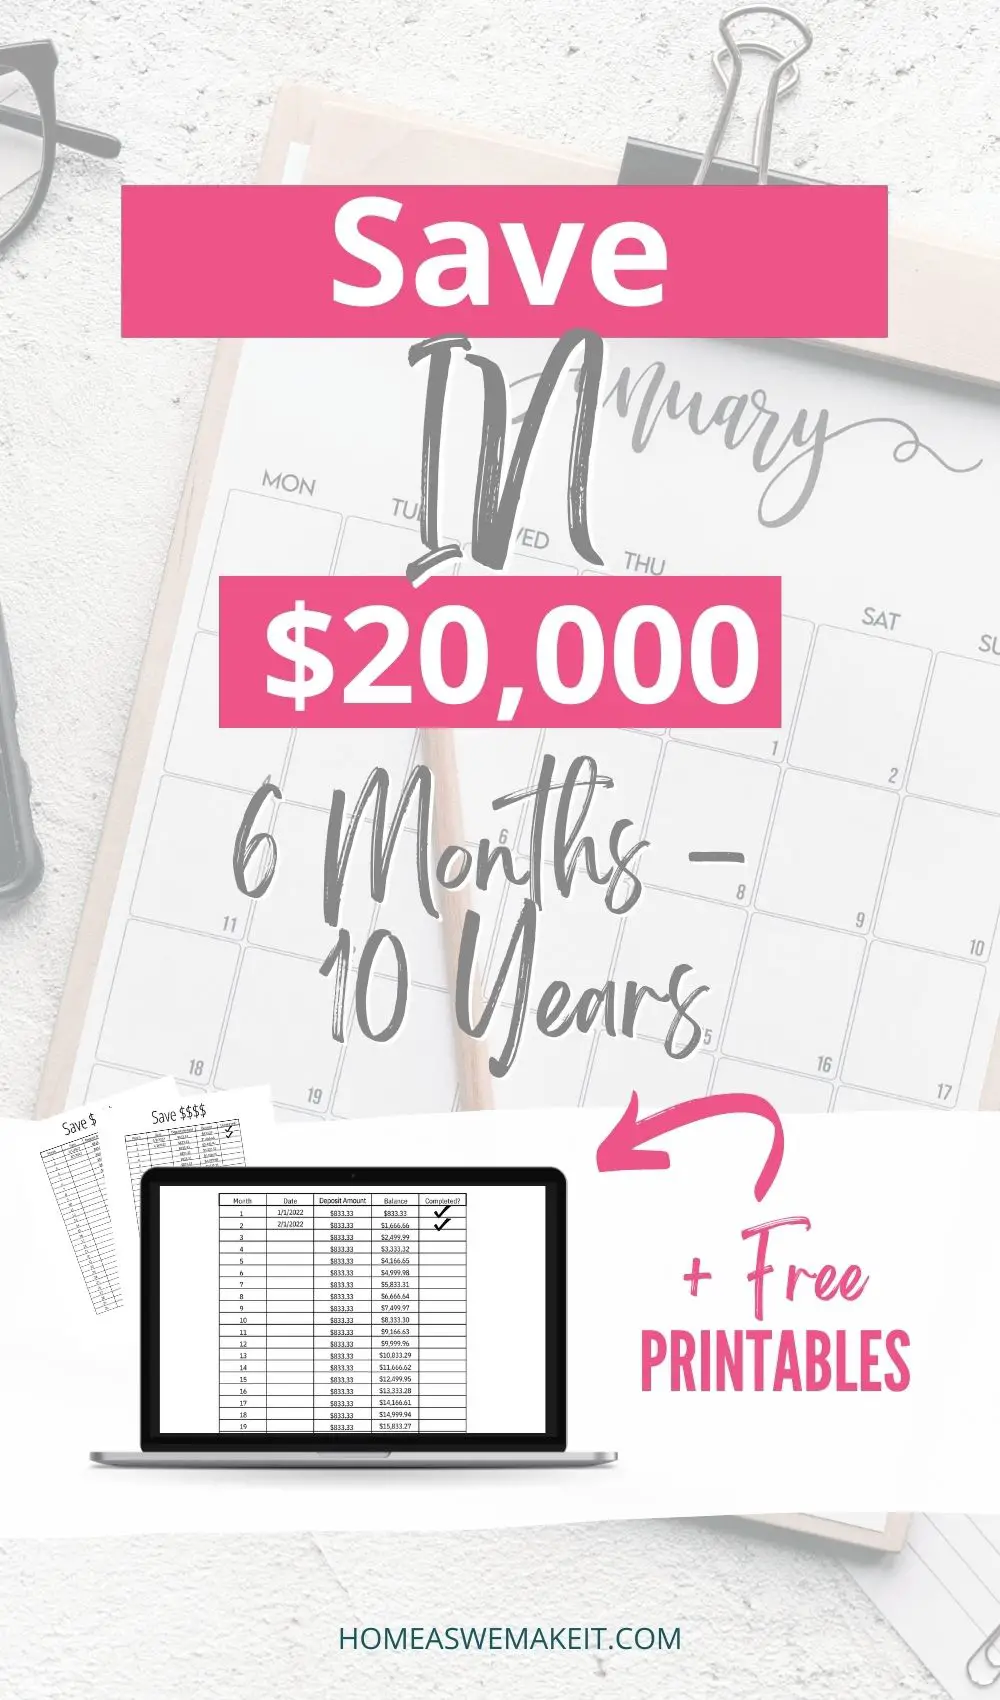 Save $20,000 in 6 months to 1 year with free printable savings trackers